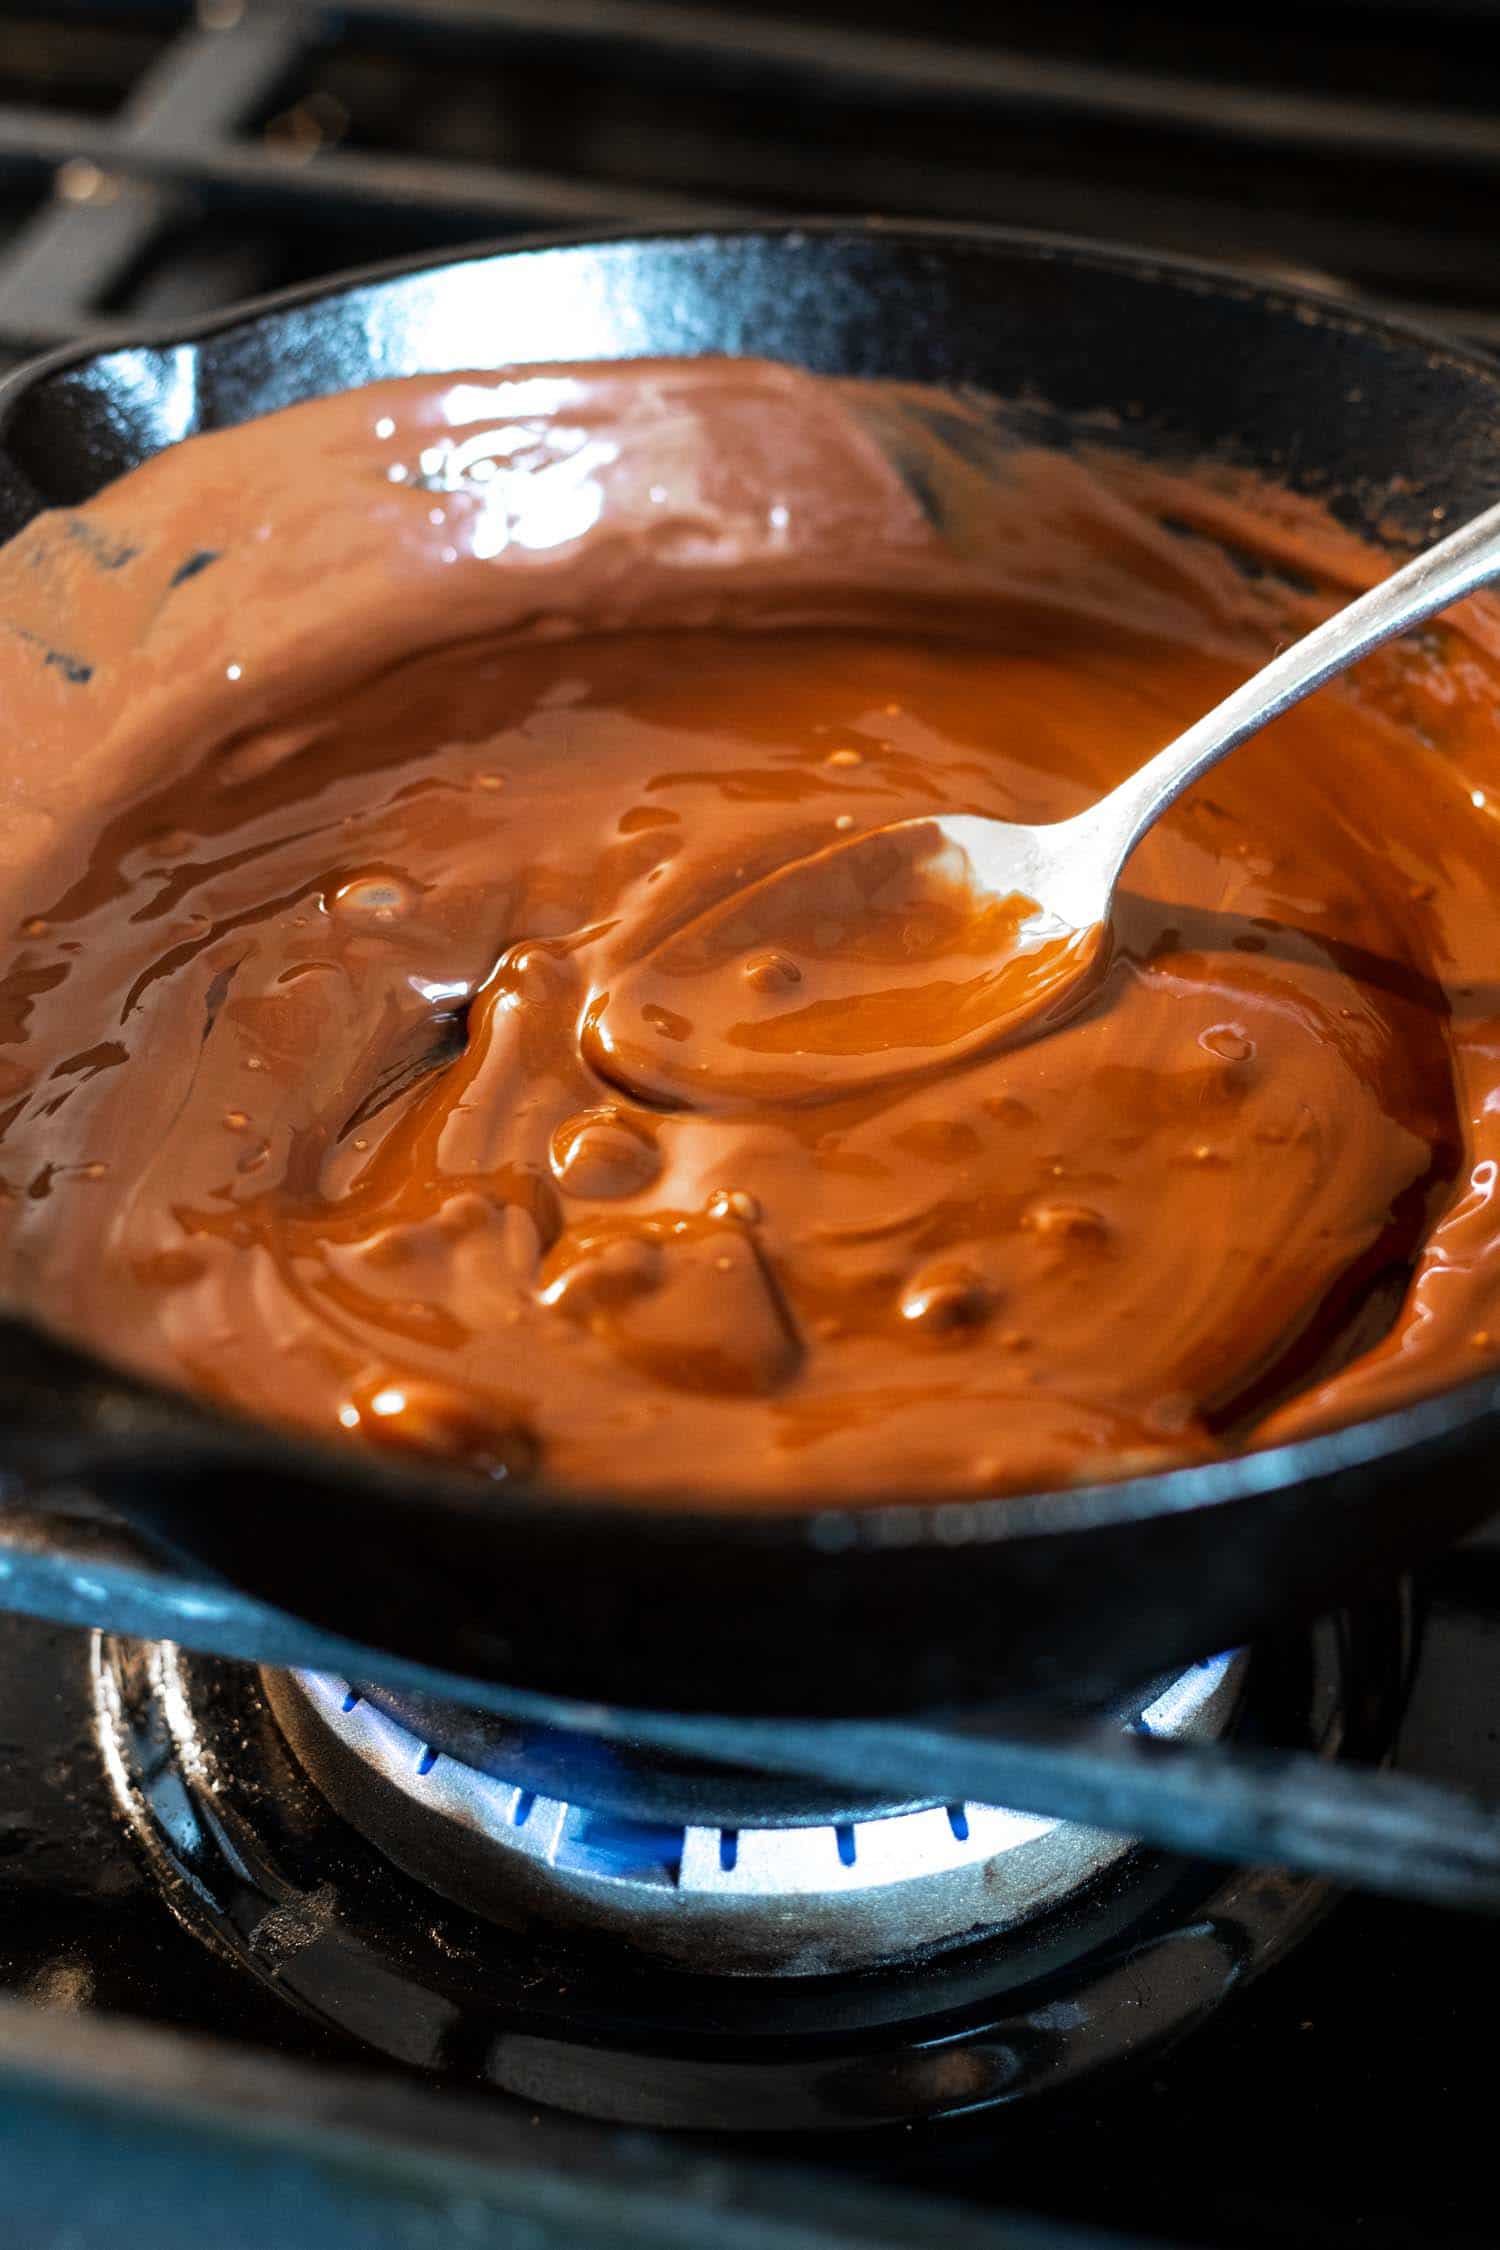 melted chocolate in a cast iron skillet